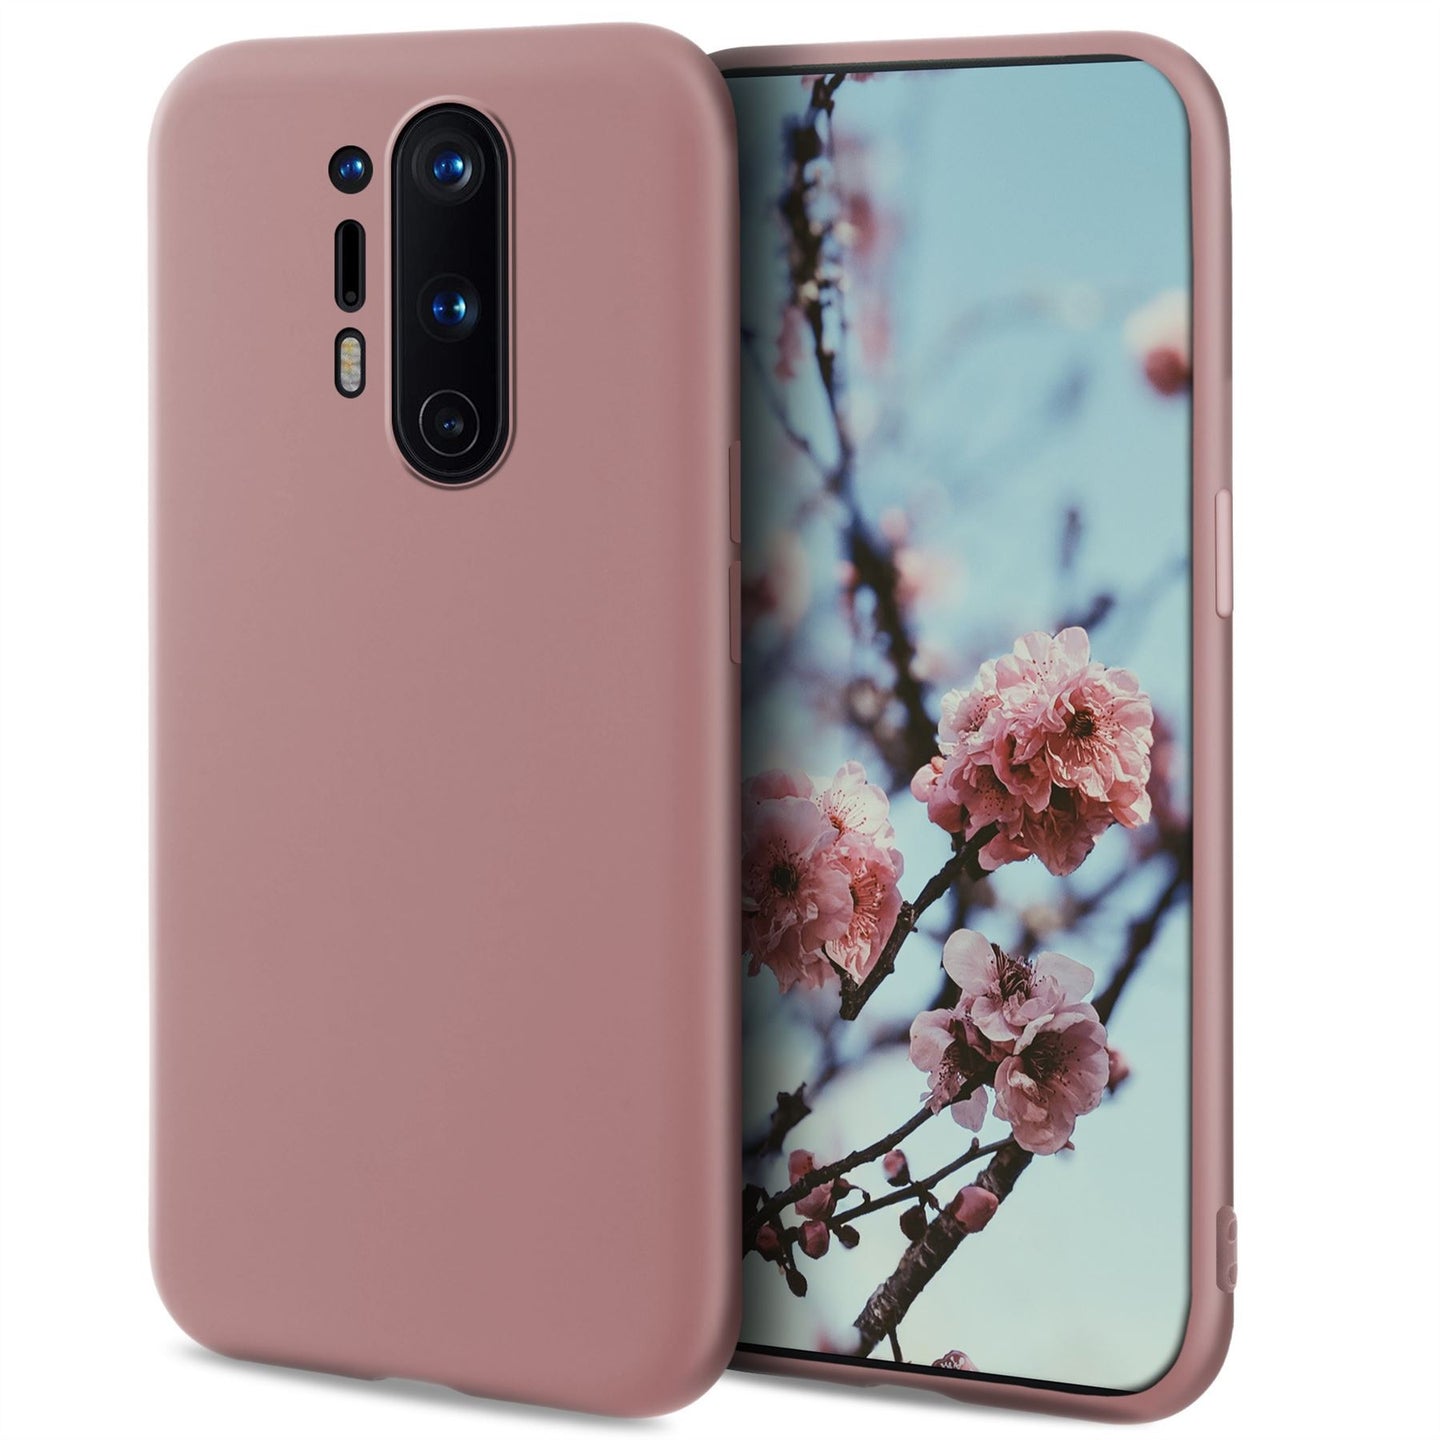 Moozy Minimalist Series Silicone Case for OnePlus 8 Pro, Rose Beige - Matte Finish Slim Soft TPU Cover